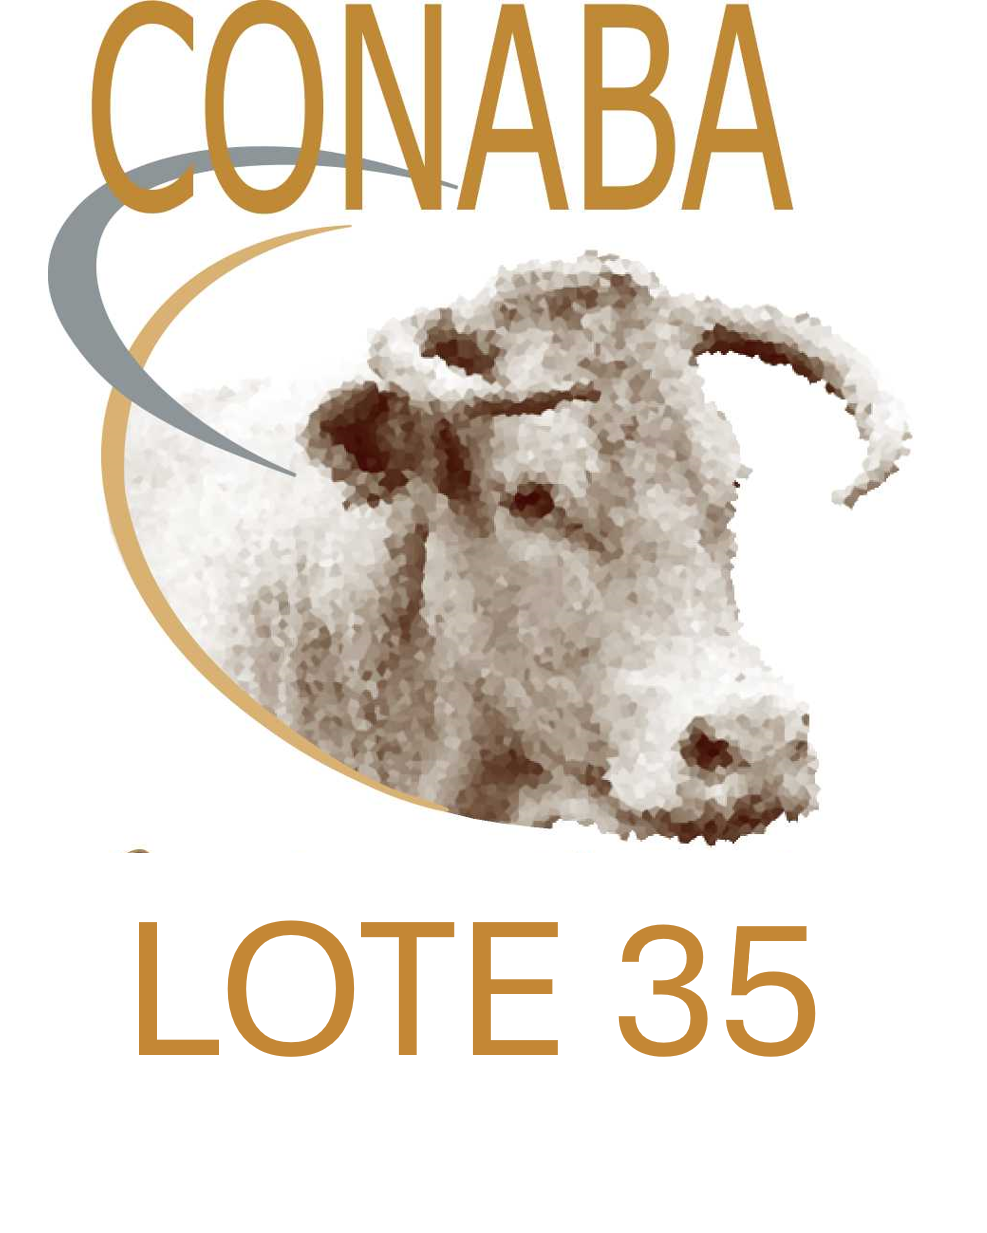 LOTE 35